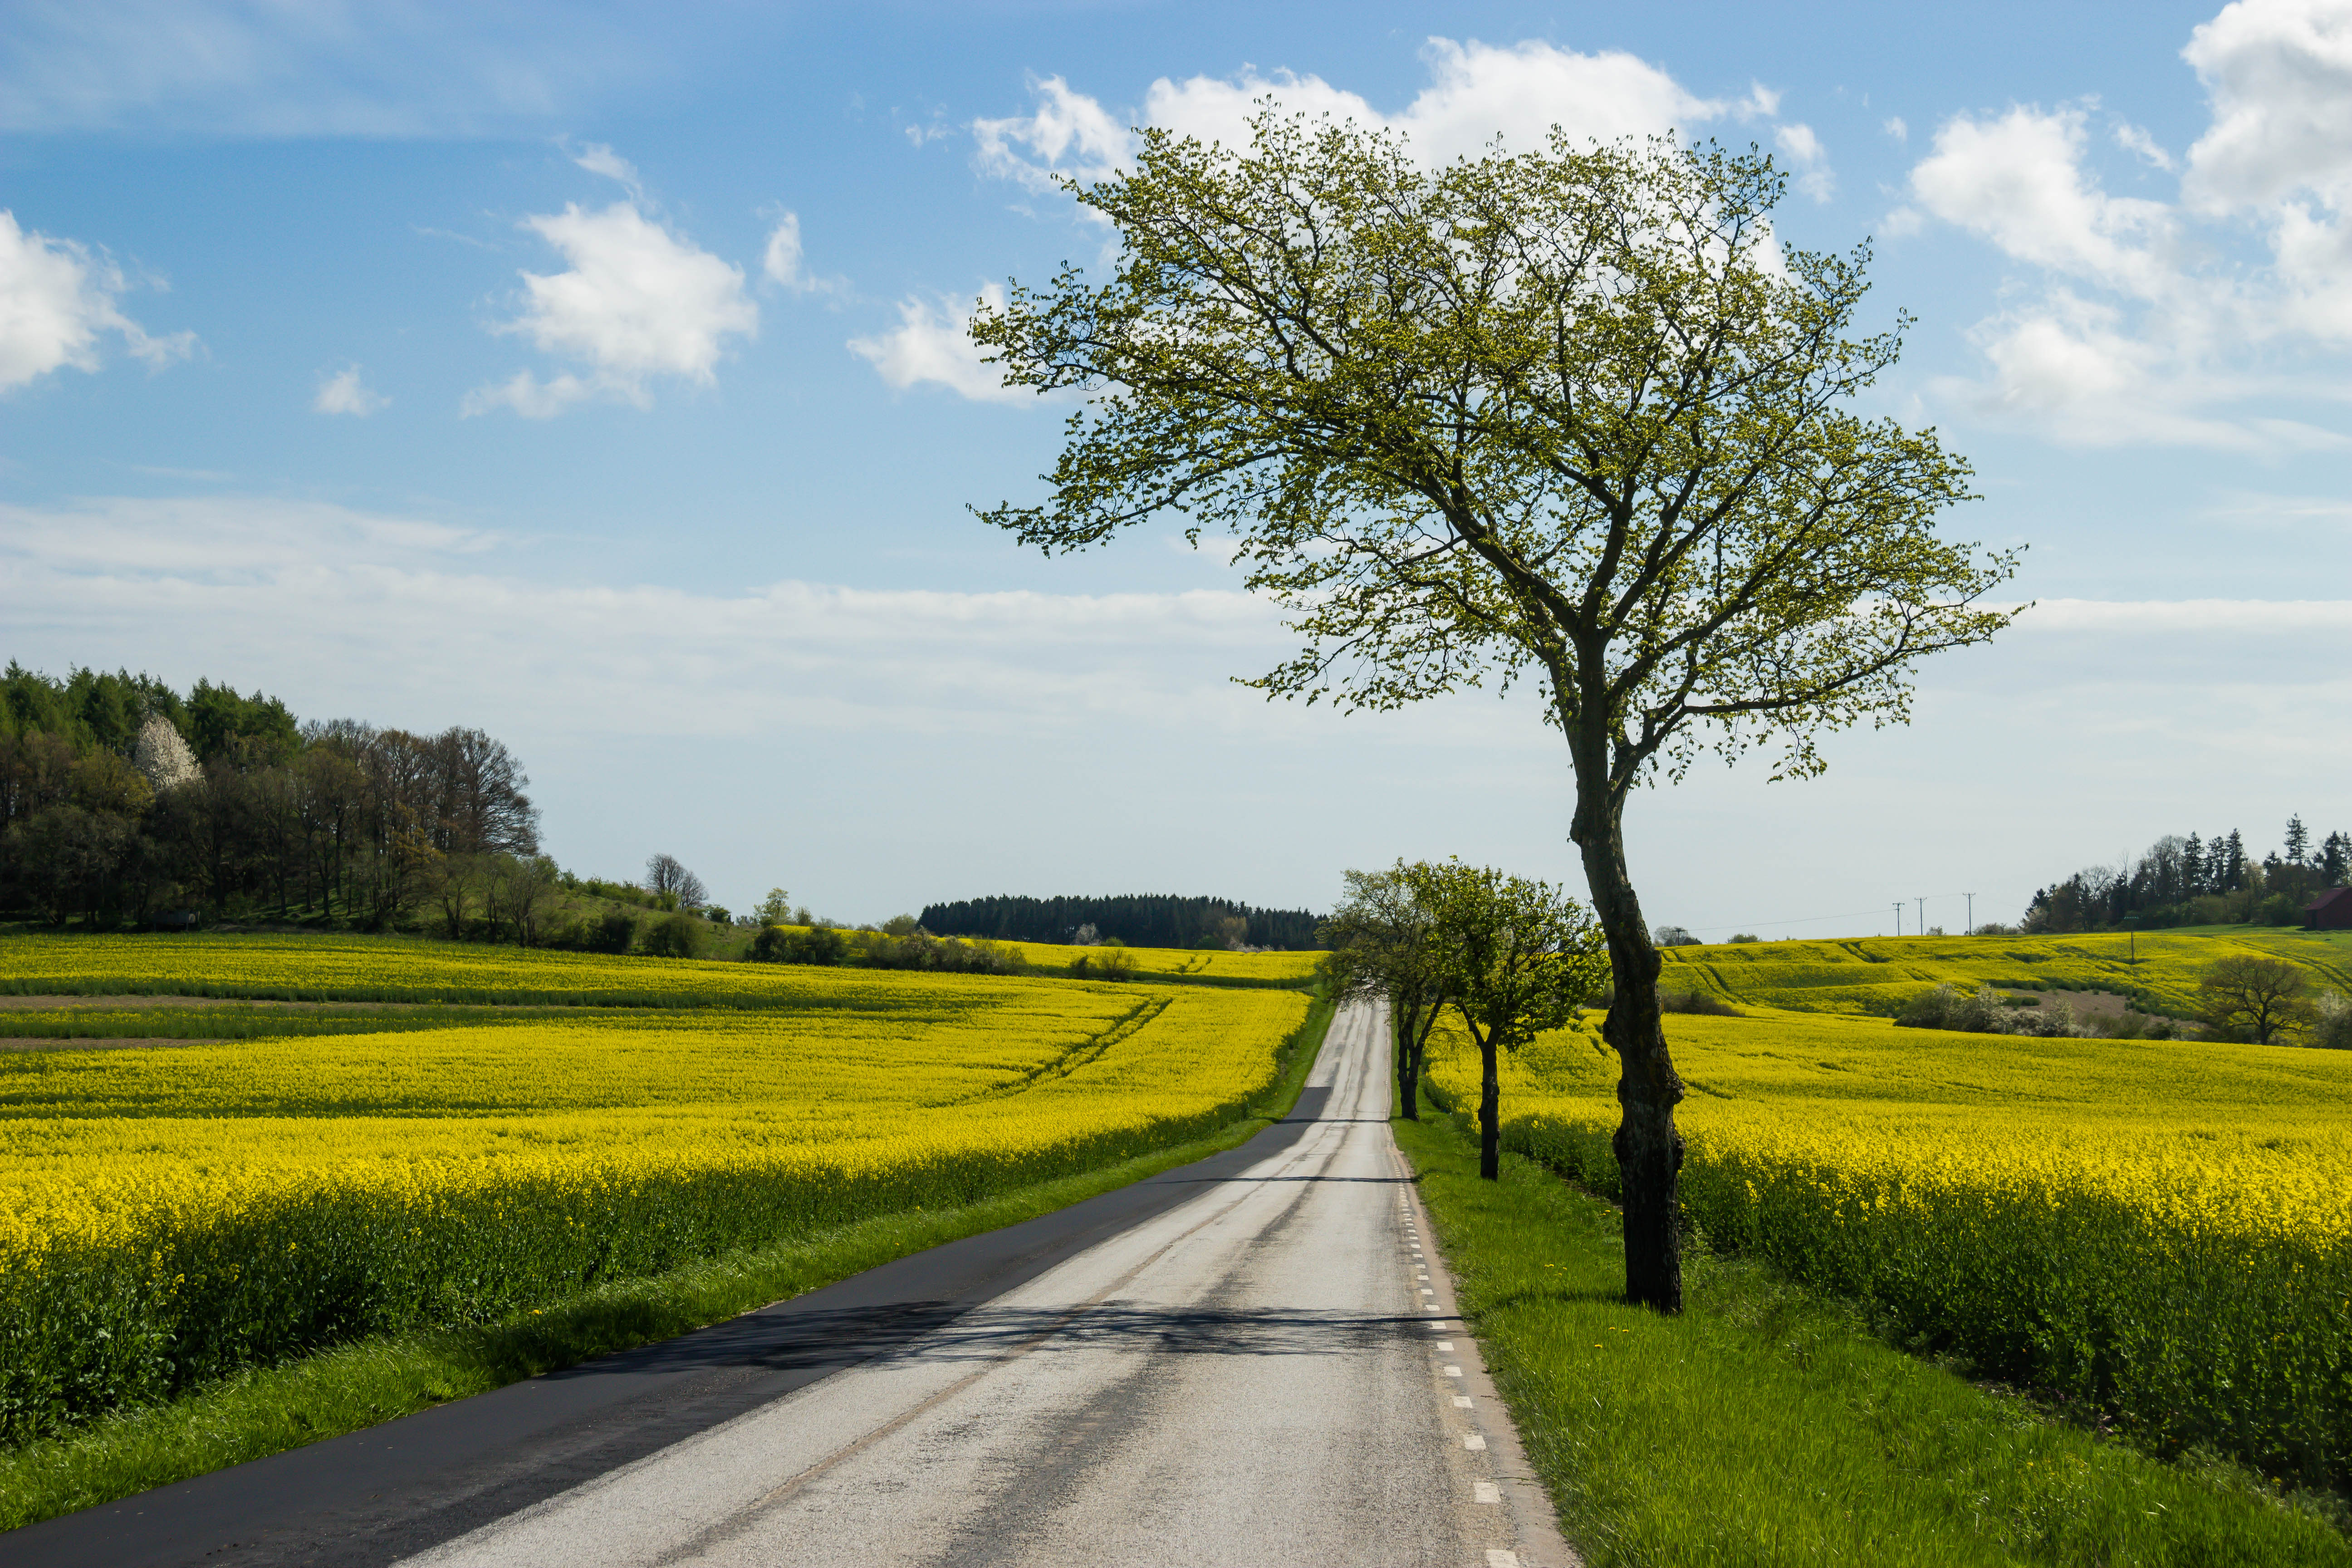 File:Country road and yellow field.jpg - Wikimedia Commons